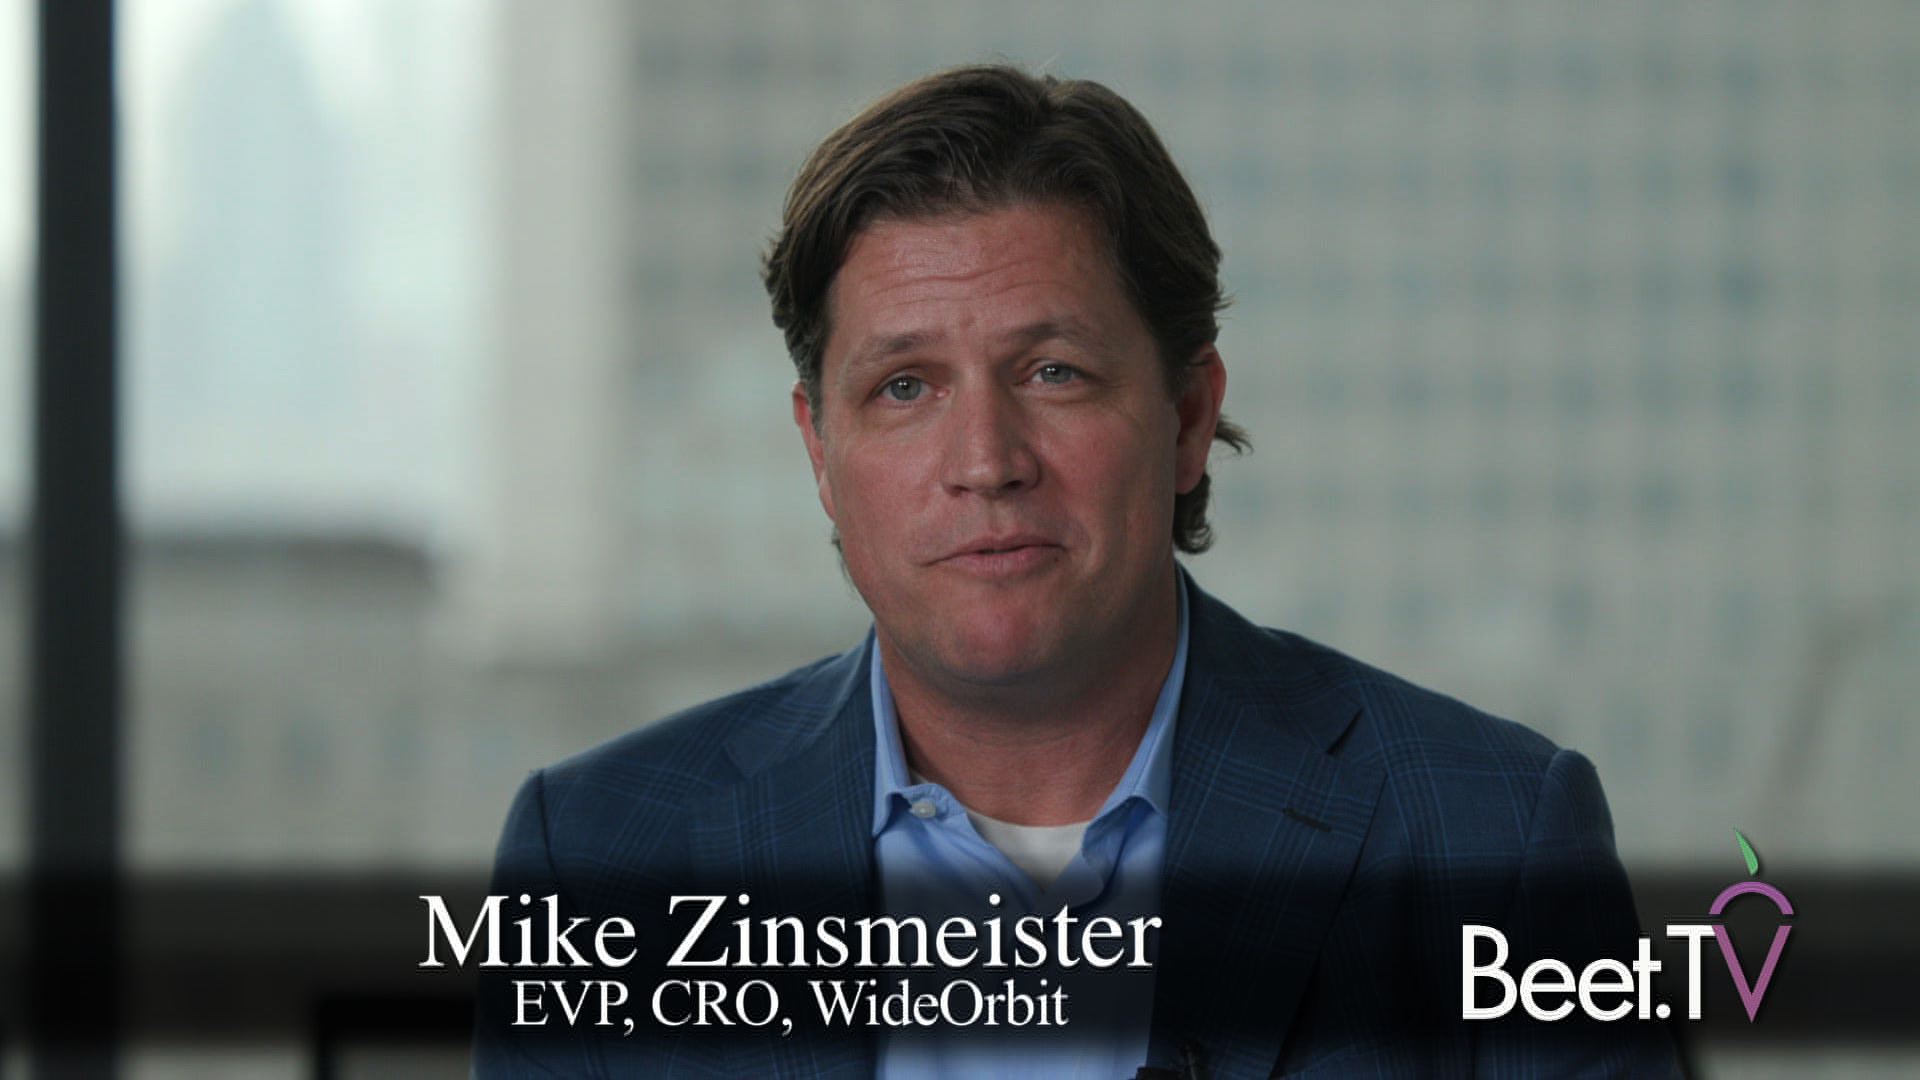 WideOrbit’s Zinsmeister Greets ‘Nervous’ Industry With Buy-Side Automation